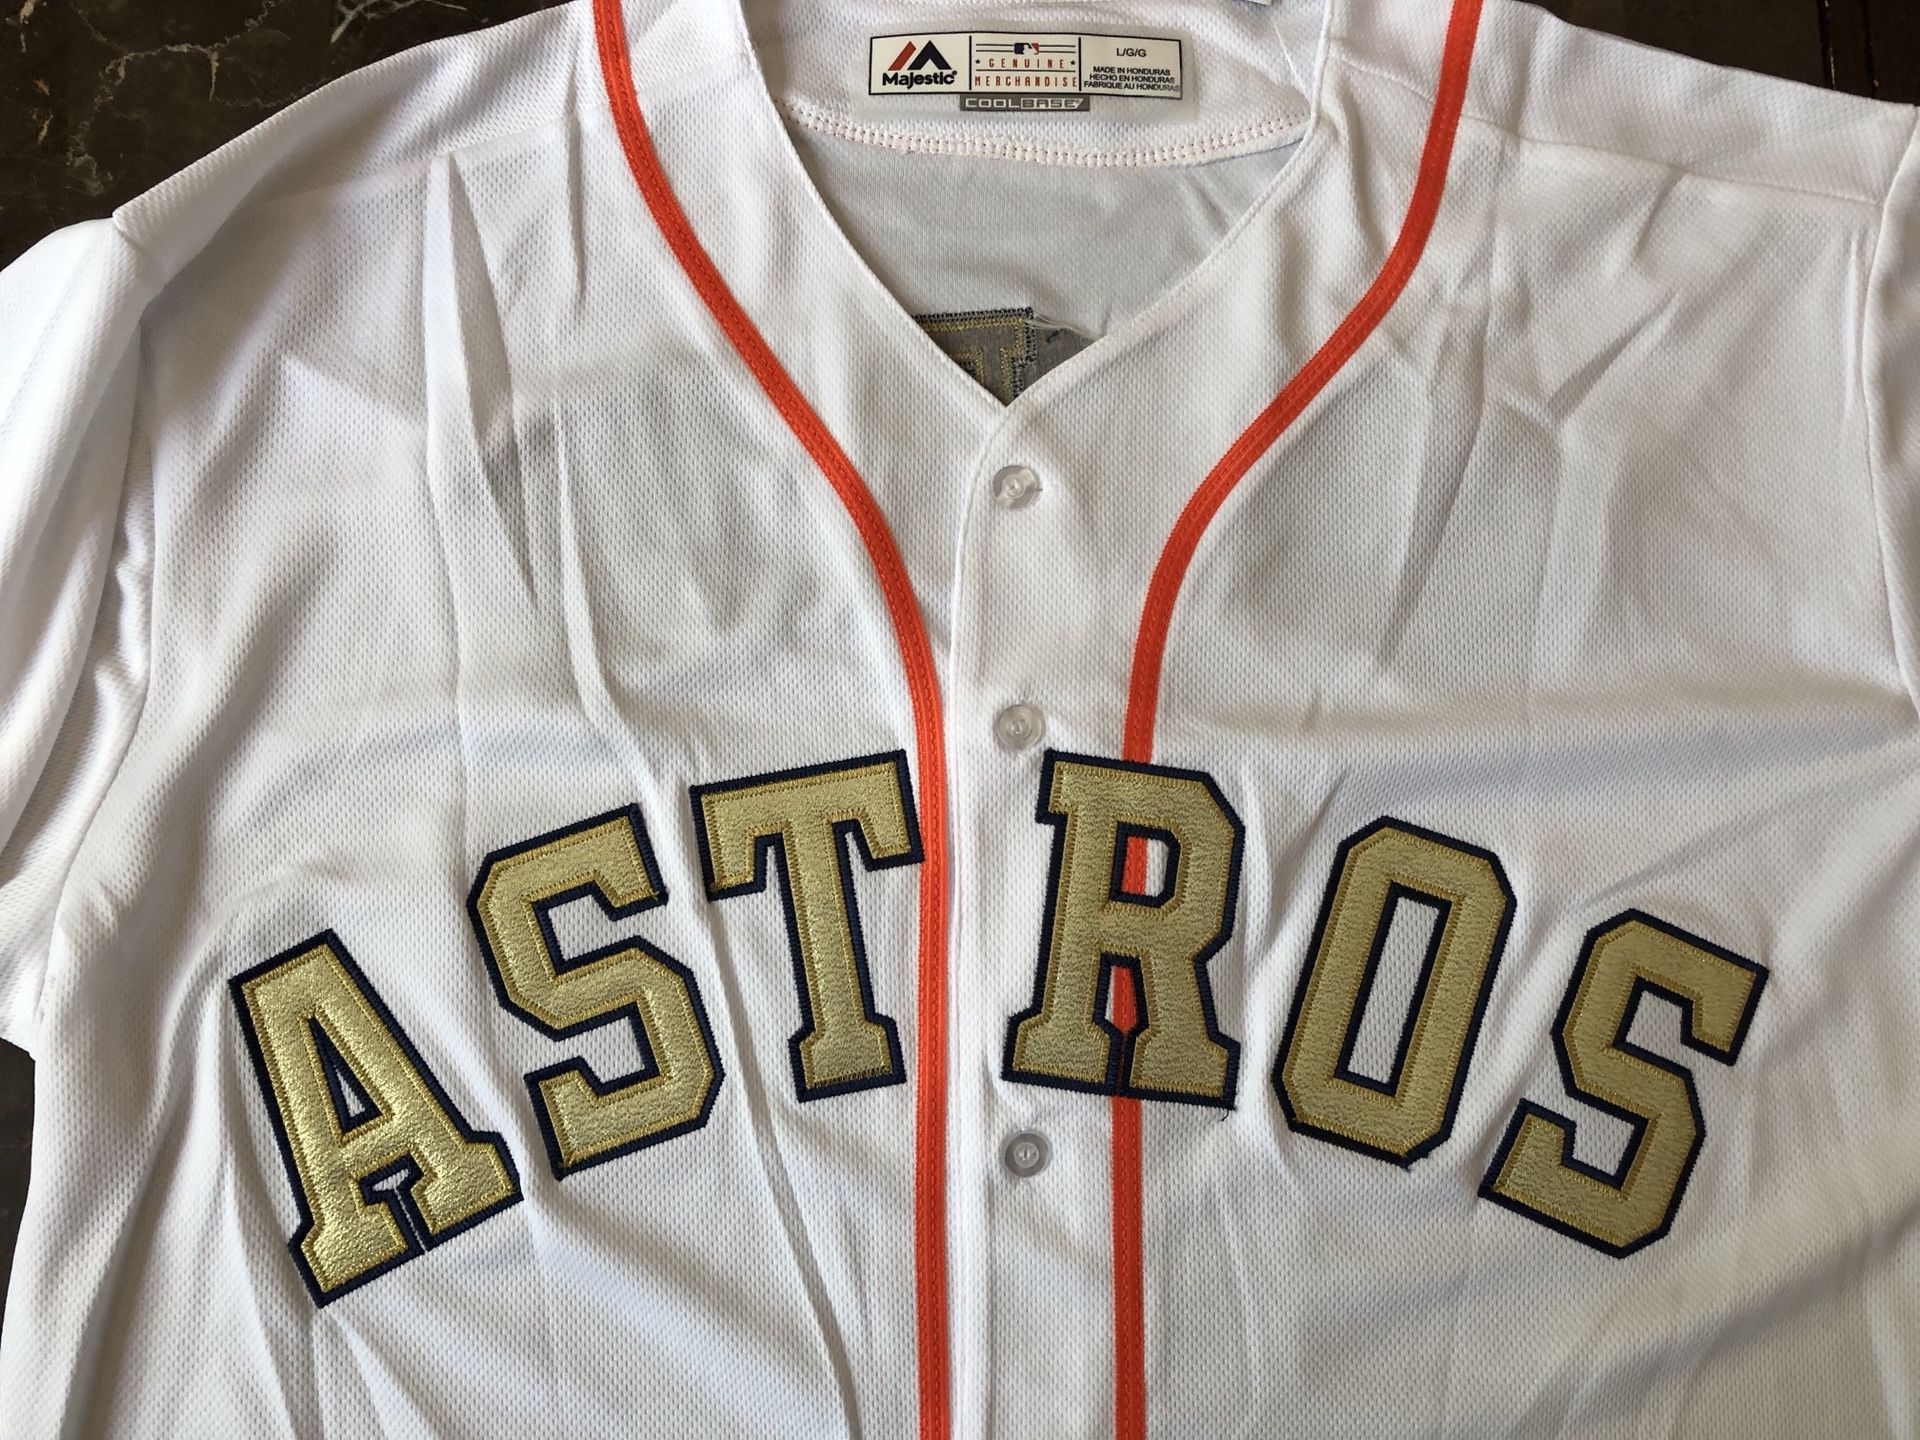 Mitchell & Ness Houston Astros Vintage Sweater for Sale in Aliso Viejo, CA  - OfferUp